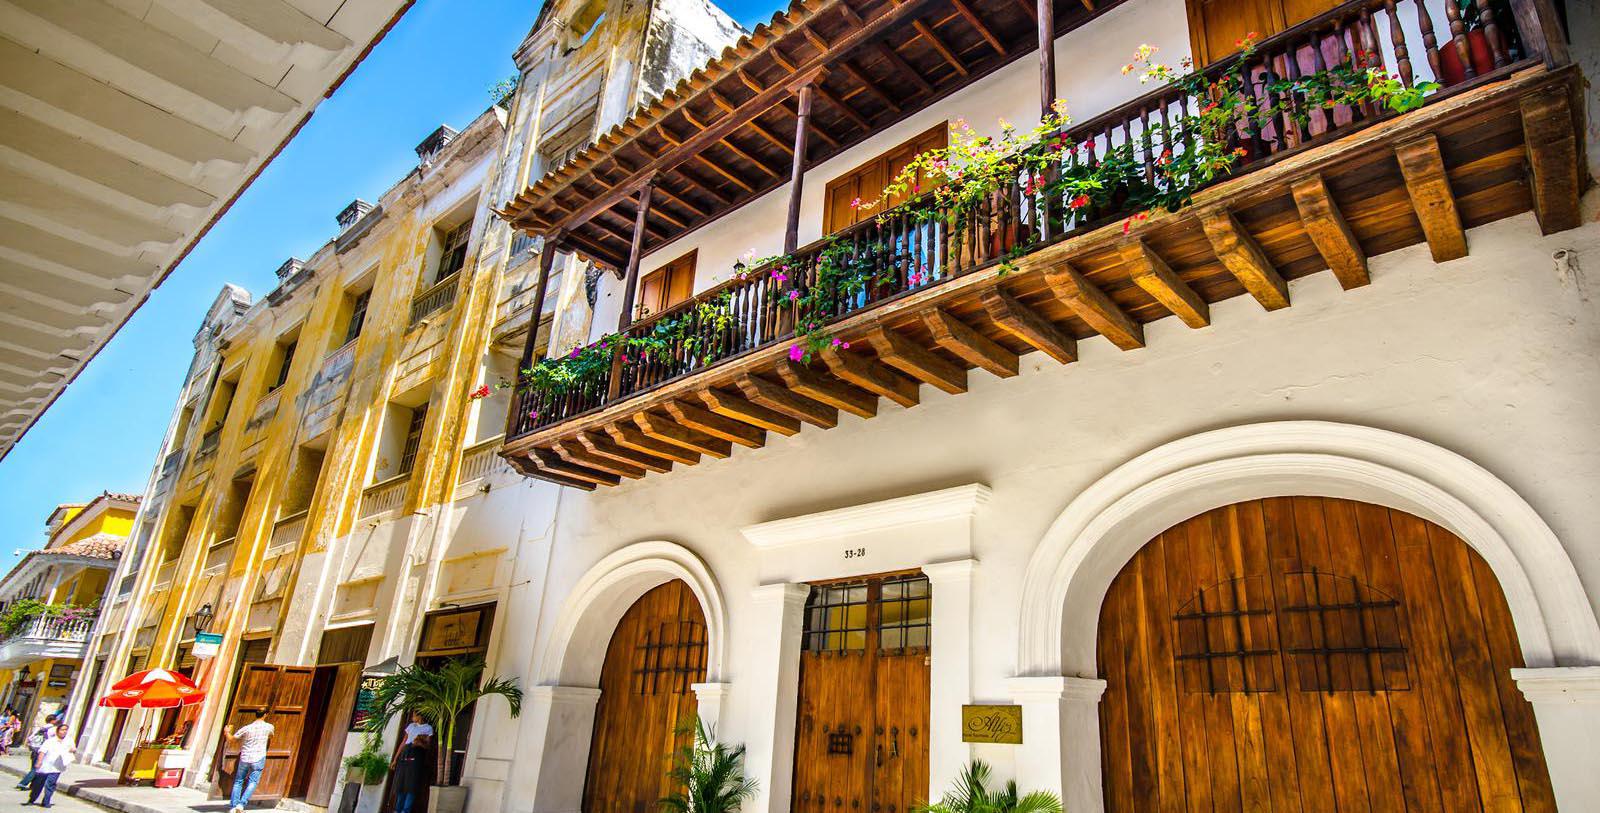 Discover the Spanish Colonial architecture of the Alfiz Hotel.